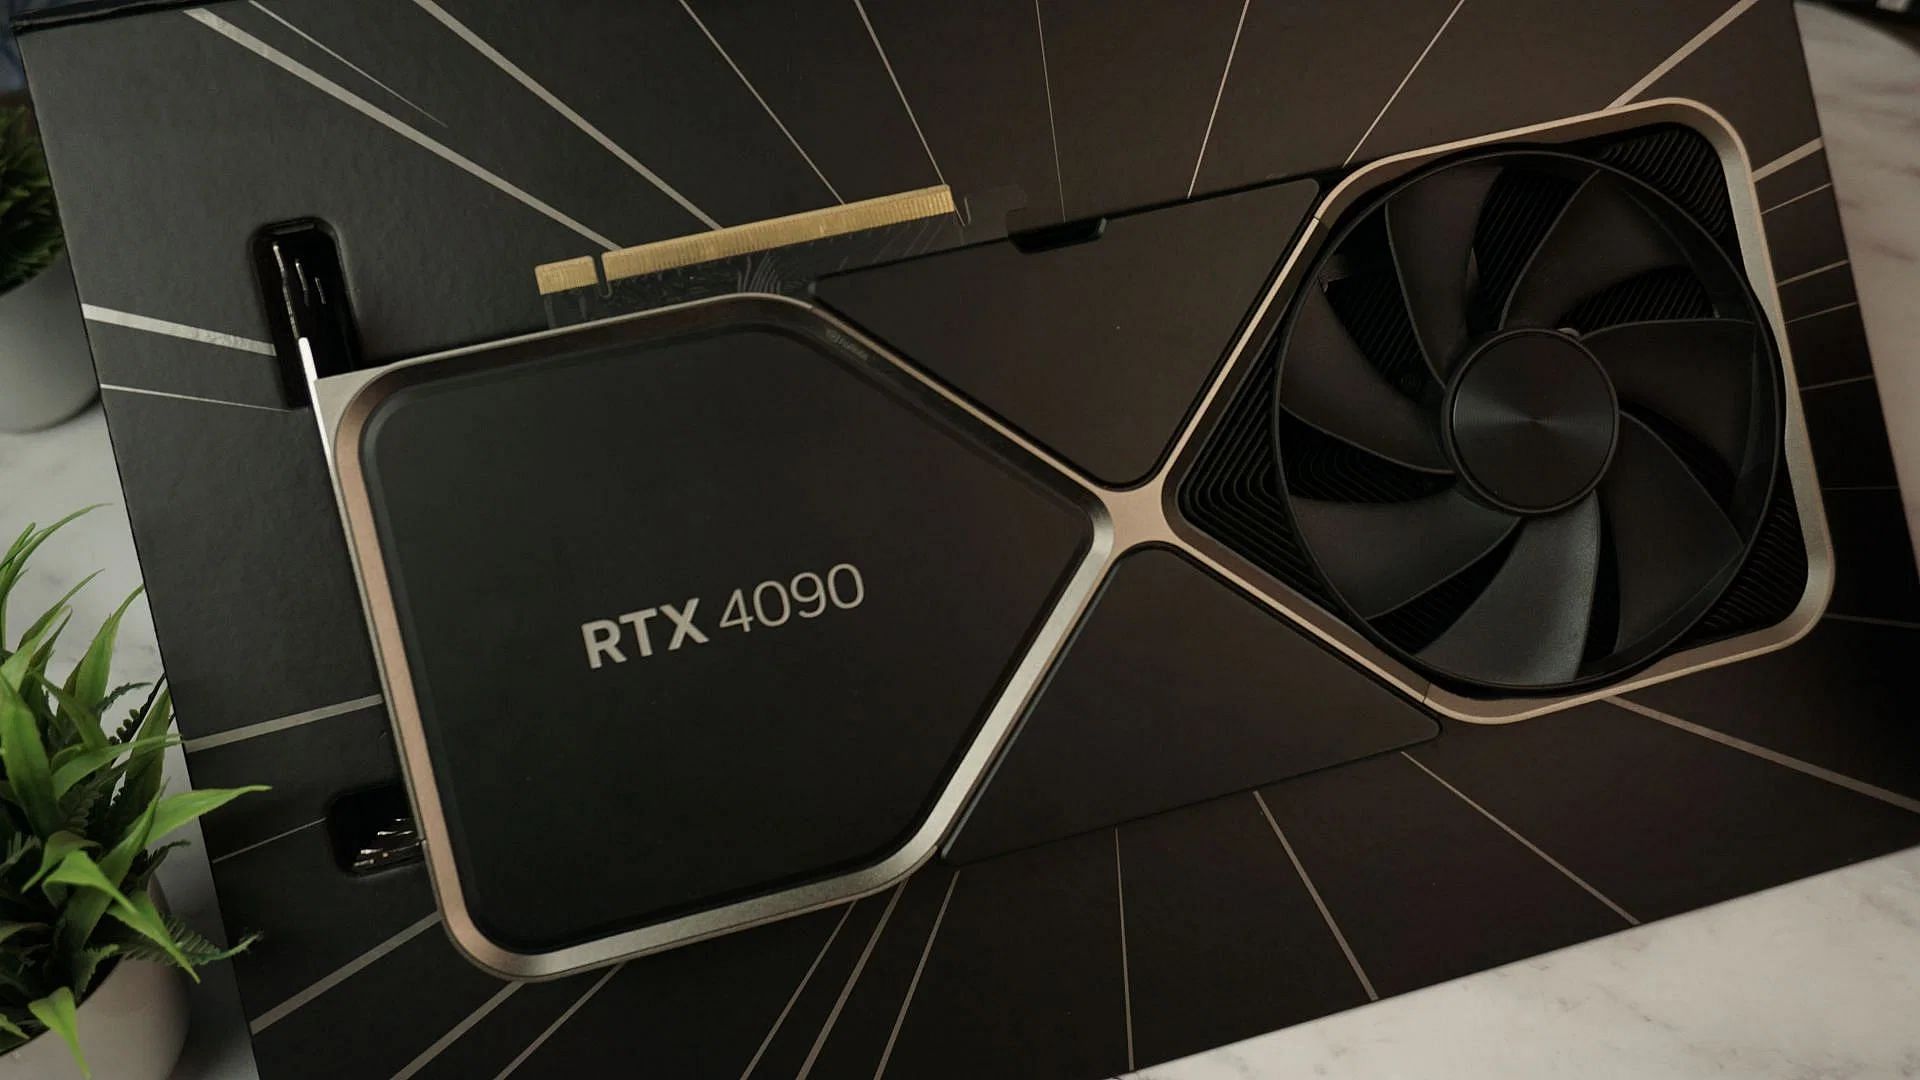 The RTX 4090 is the most powerful graphics card today (Image via Sportskeeda)